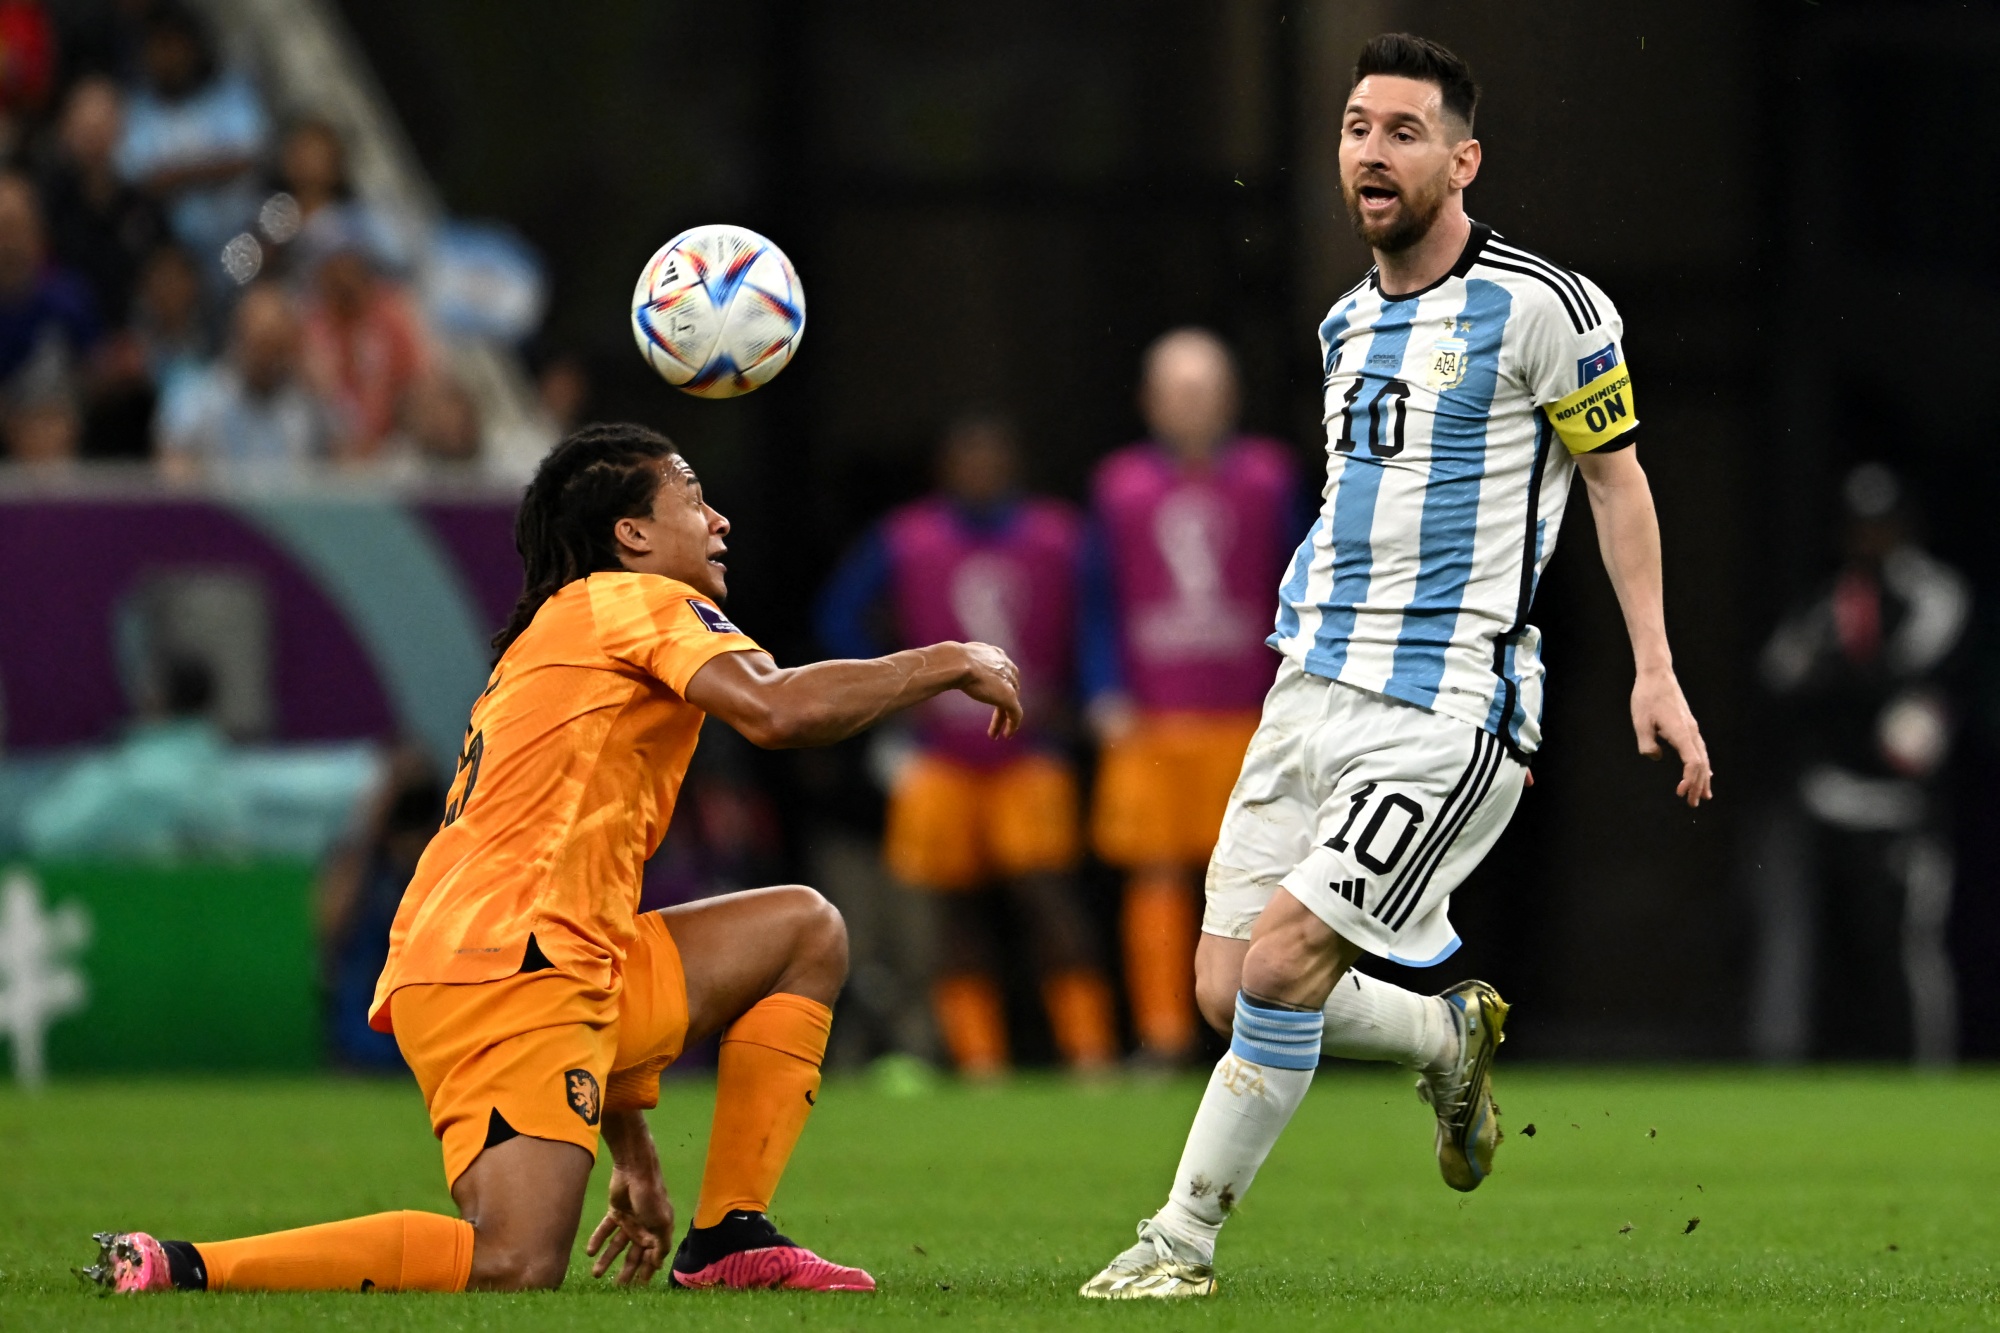 Netherlands' defender #05 Nathan Ake and Argentina's forward #10 Lionel Messi fight for the ball during the Qatar 2022 World Cup quarter-final football match between Netherlands and Argentina at Lusail Stadium, north of Doha, on December 9, 2022. (Photo by MANAN VATSYAYANA / AFP)